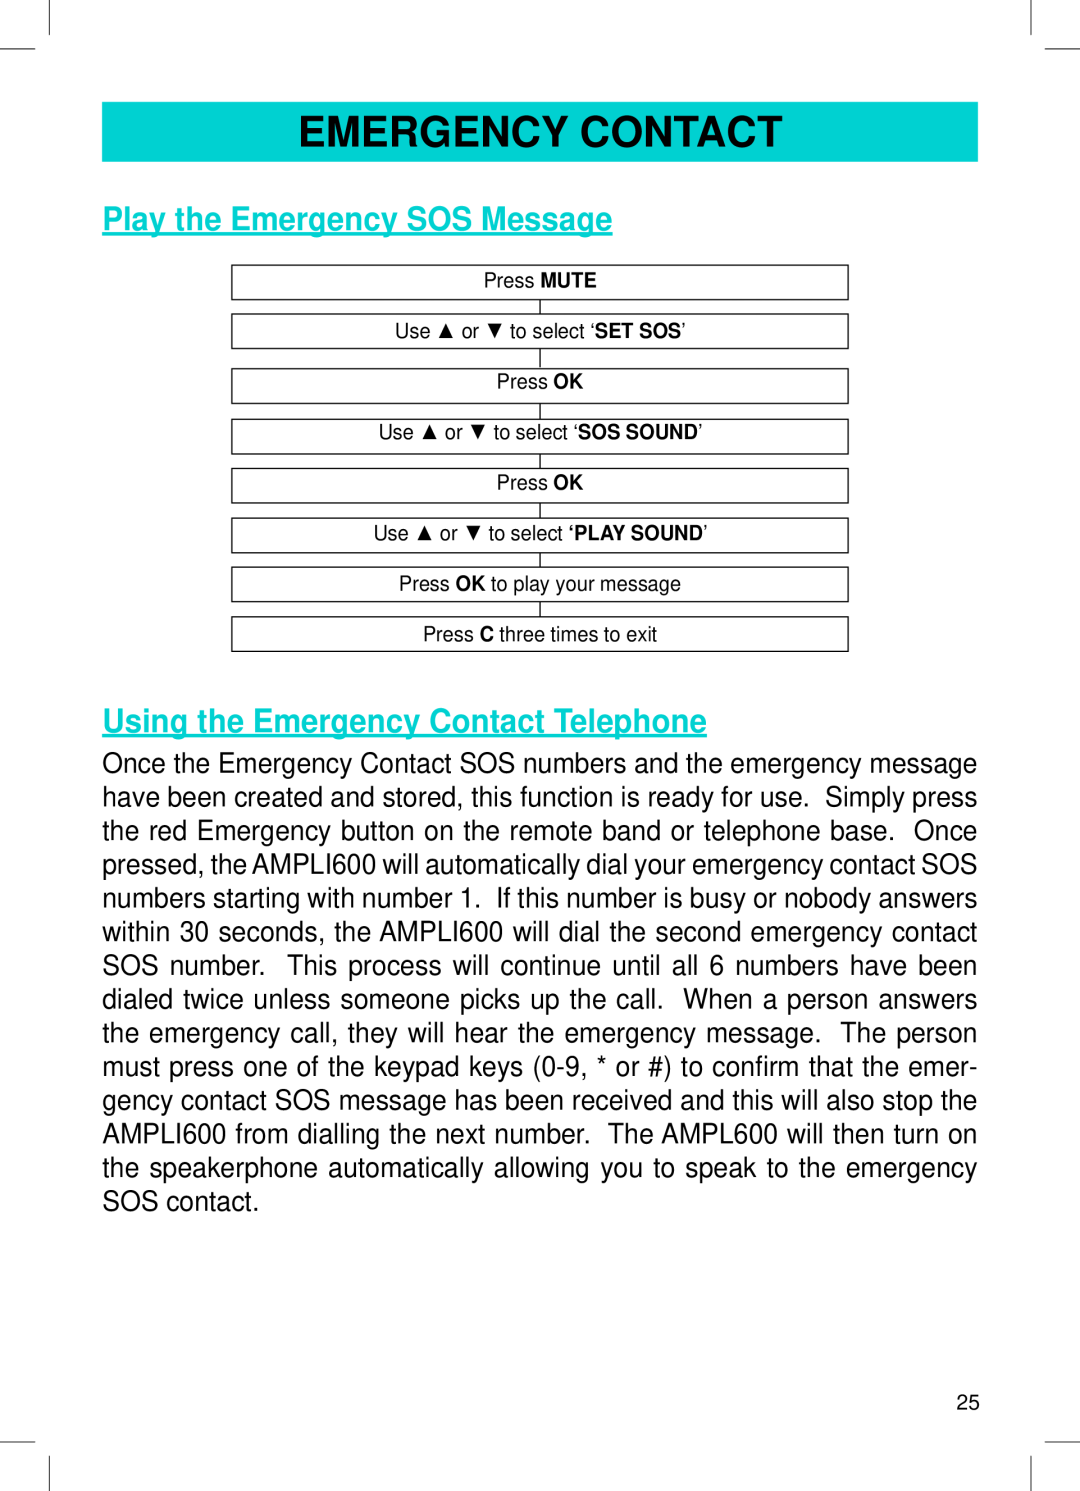 Geemarc AMPLI600 manual Play the Emergency SOS Message, Using the Emergency Contact Telephone 